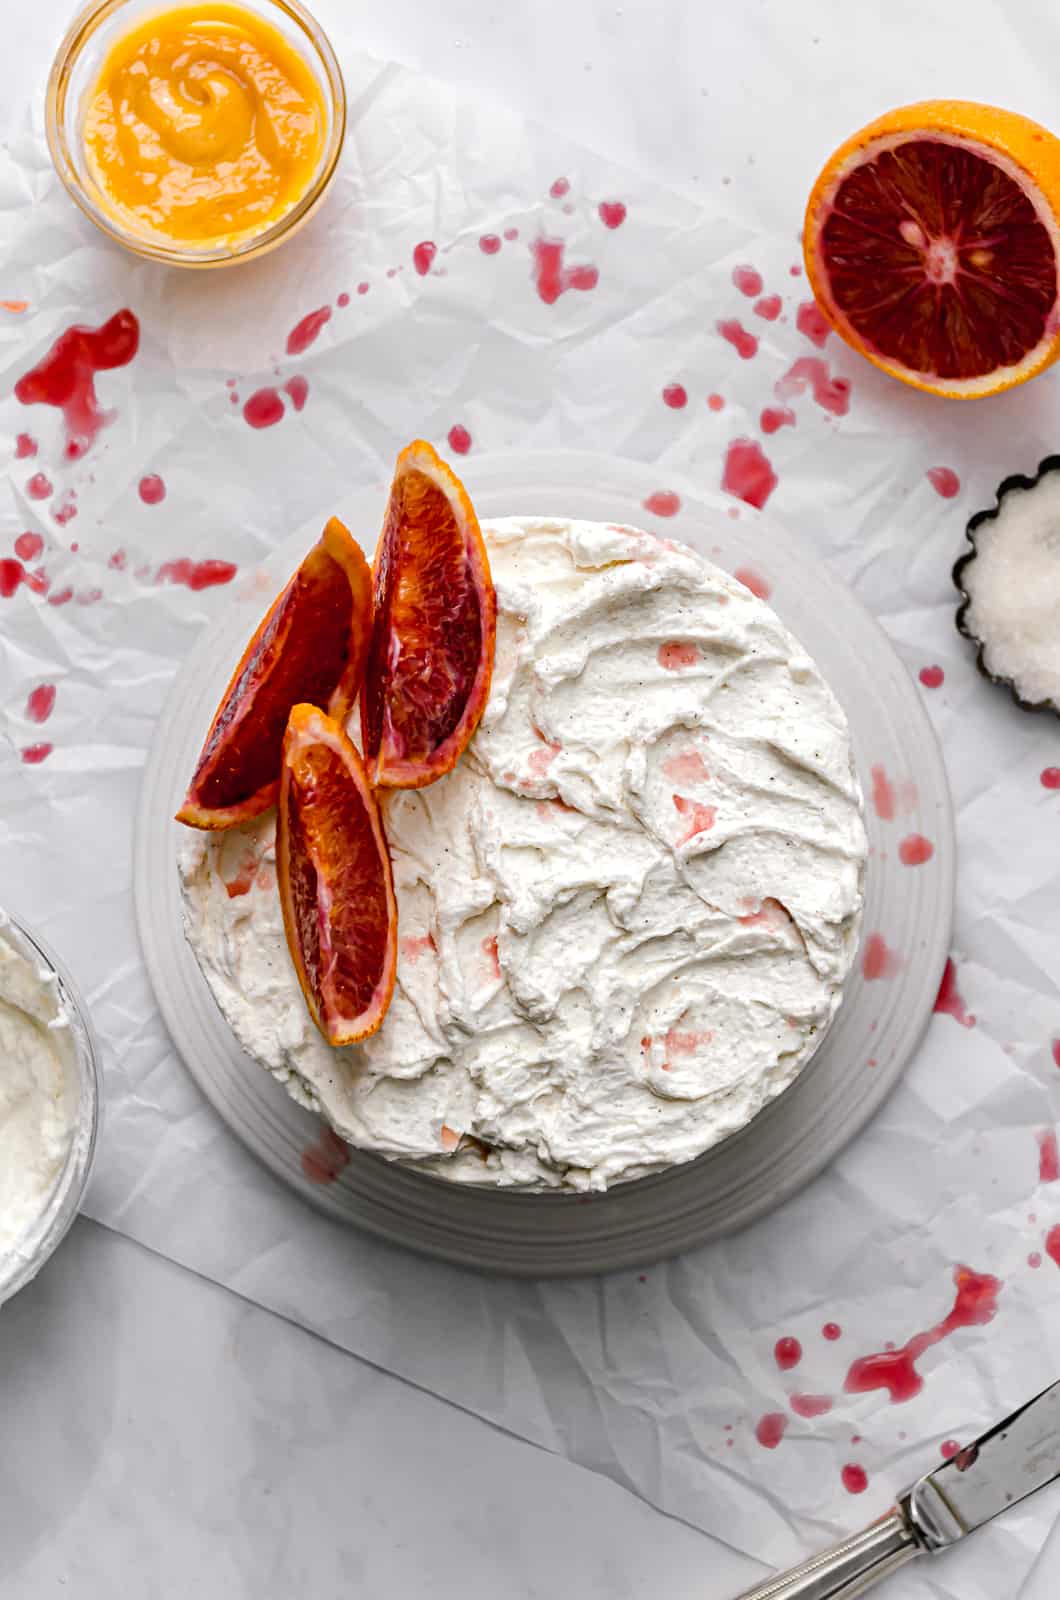 almond cake with blood orange curd and mascarpone frosting with blood orange slices on top.